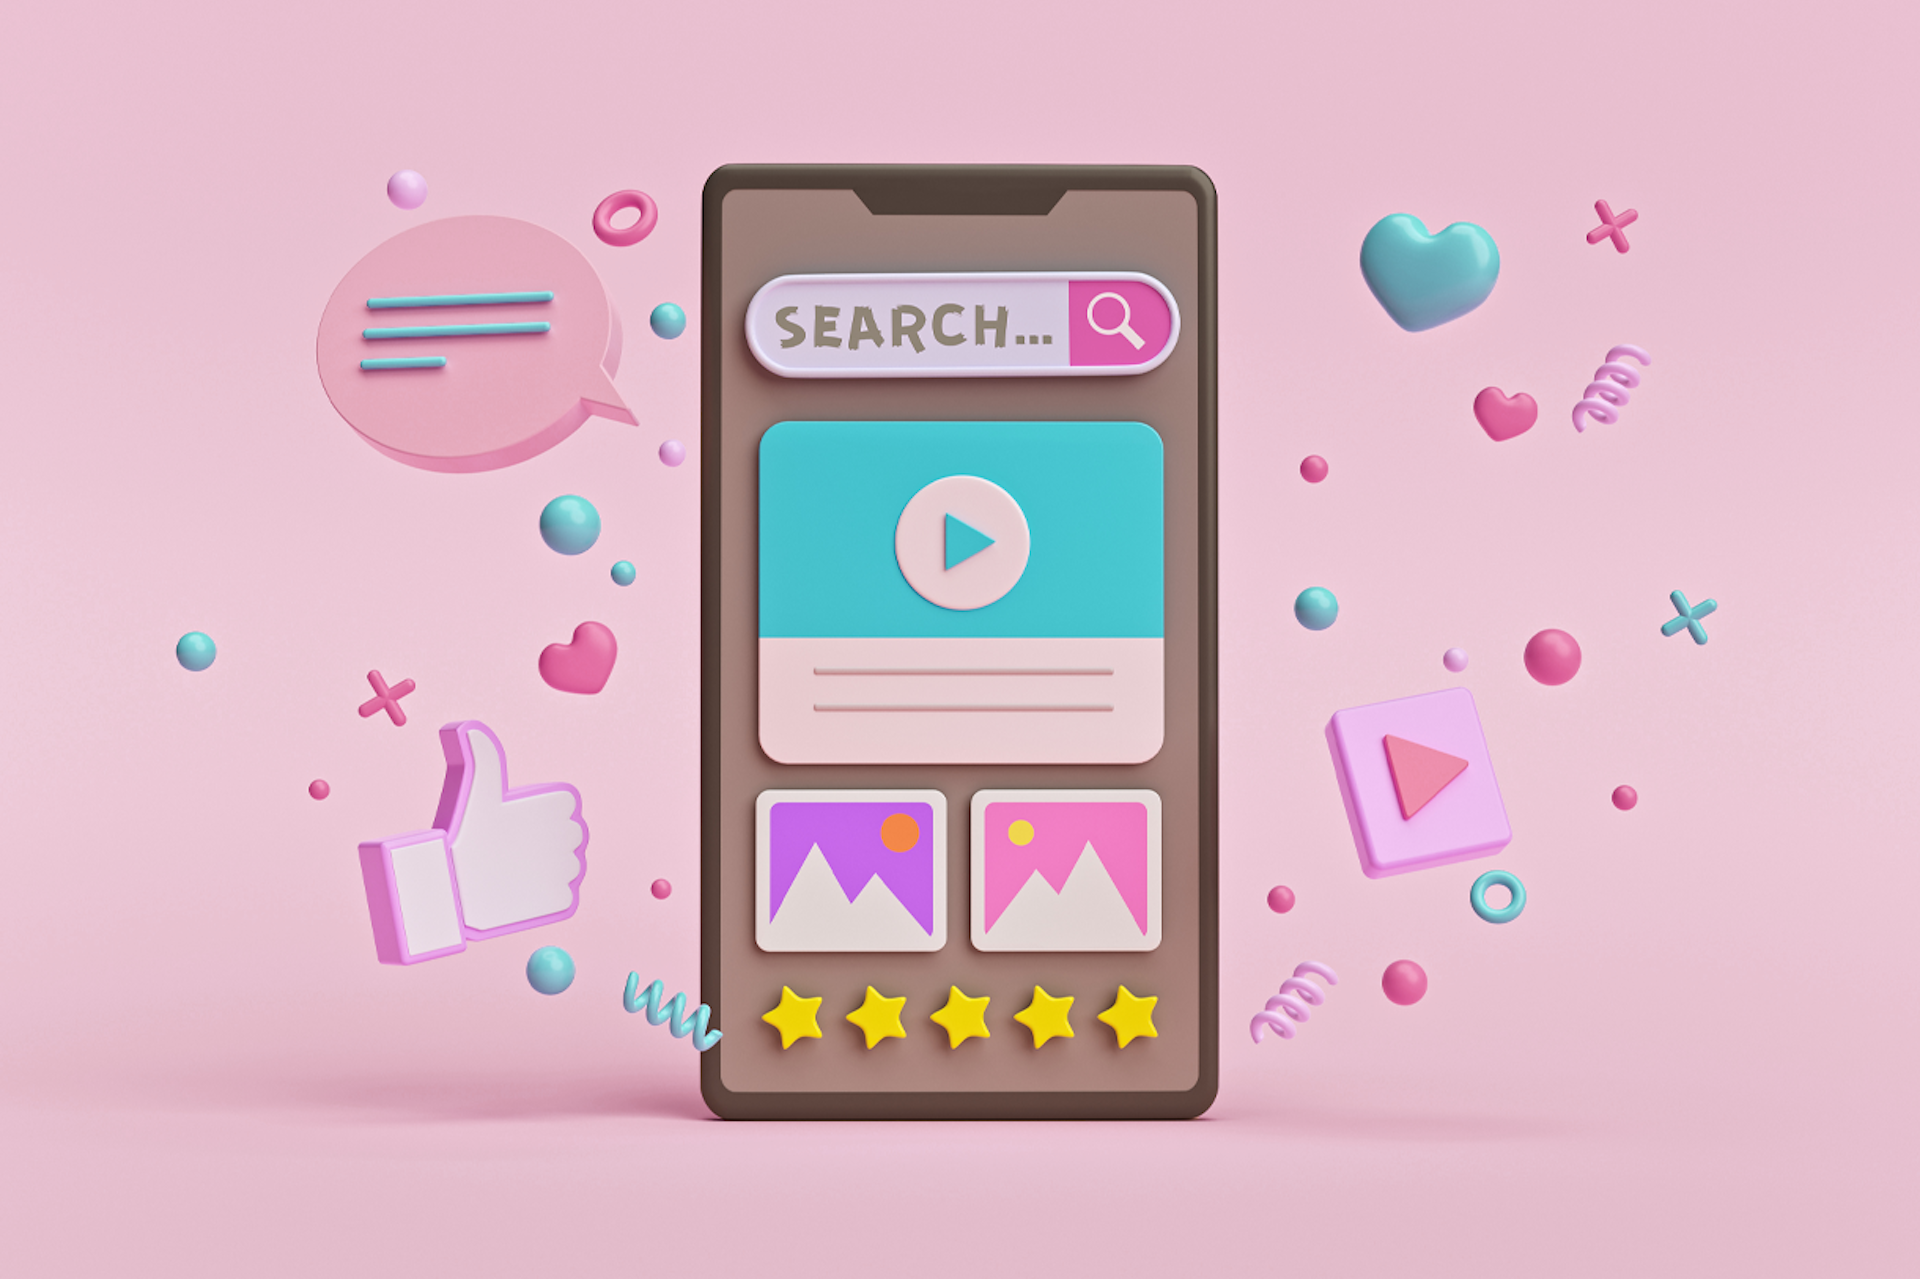 A search bar, video, and other icons appear on a smartphone screen in this image for a blog about content marketing.